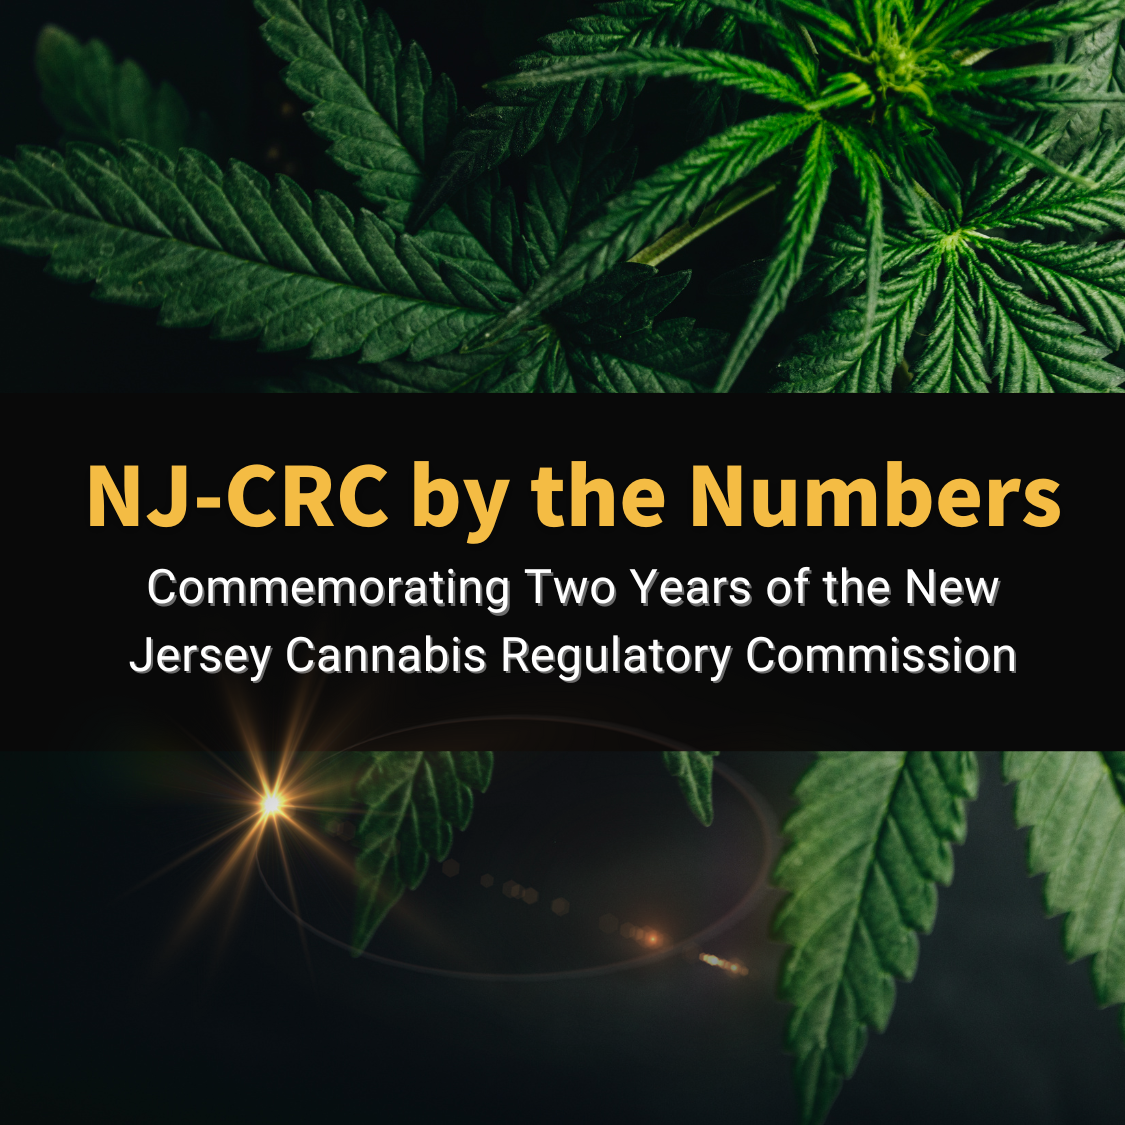 NJ-CRC by the Numbers